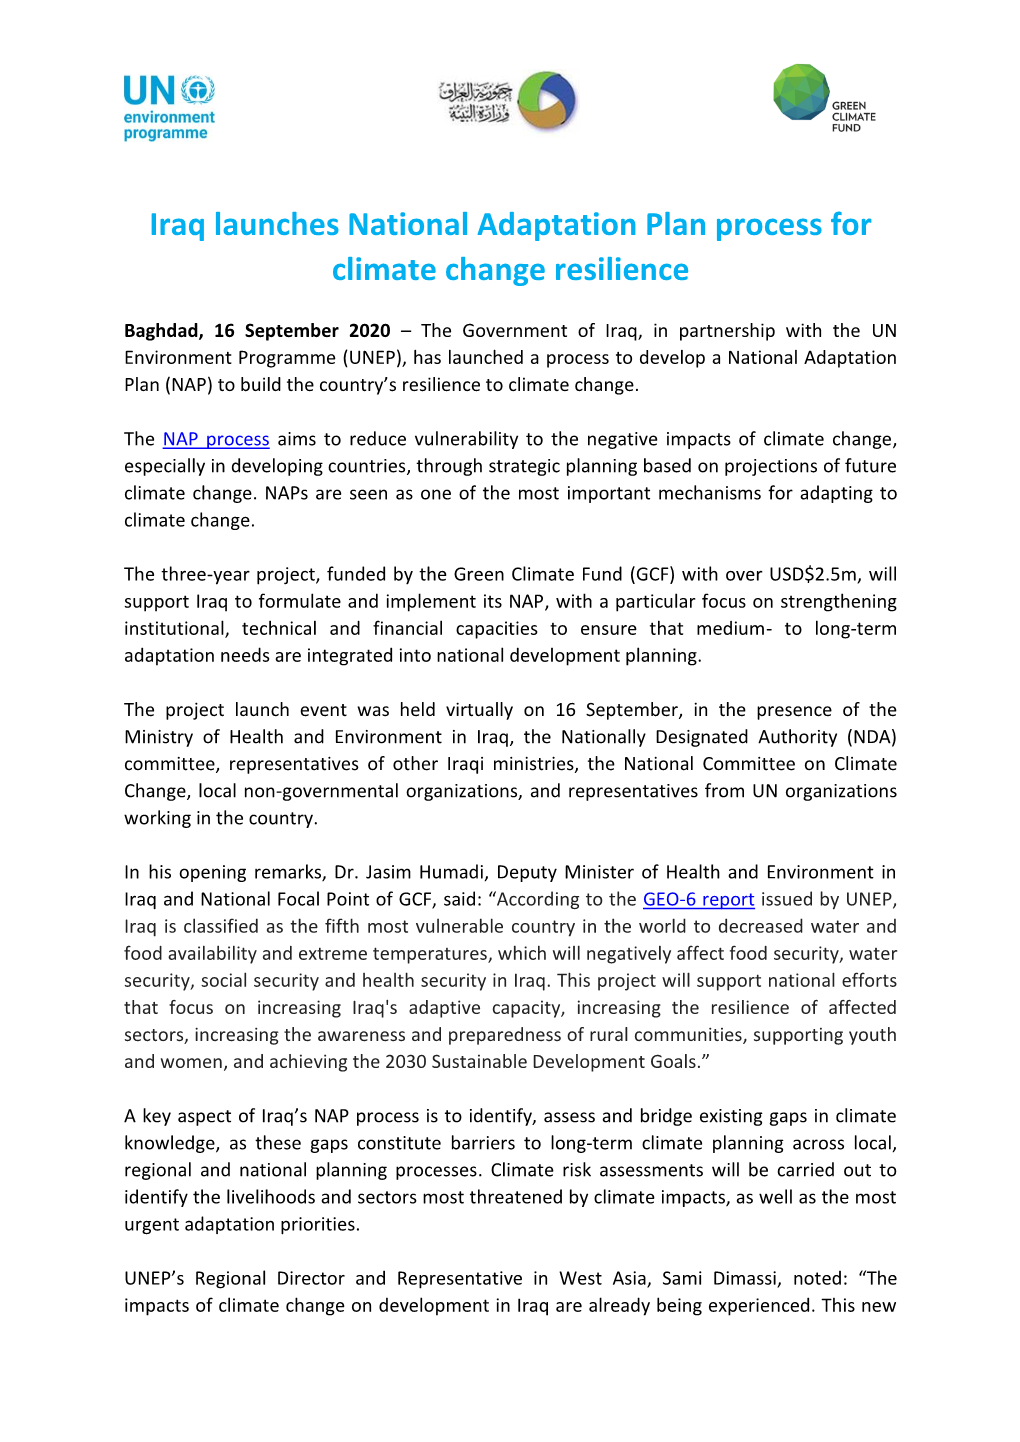 Iraq Launches National Adaptation Plan Process for Climate Change Resilience